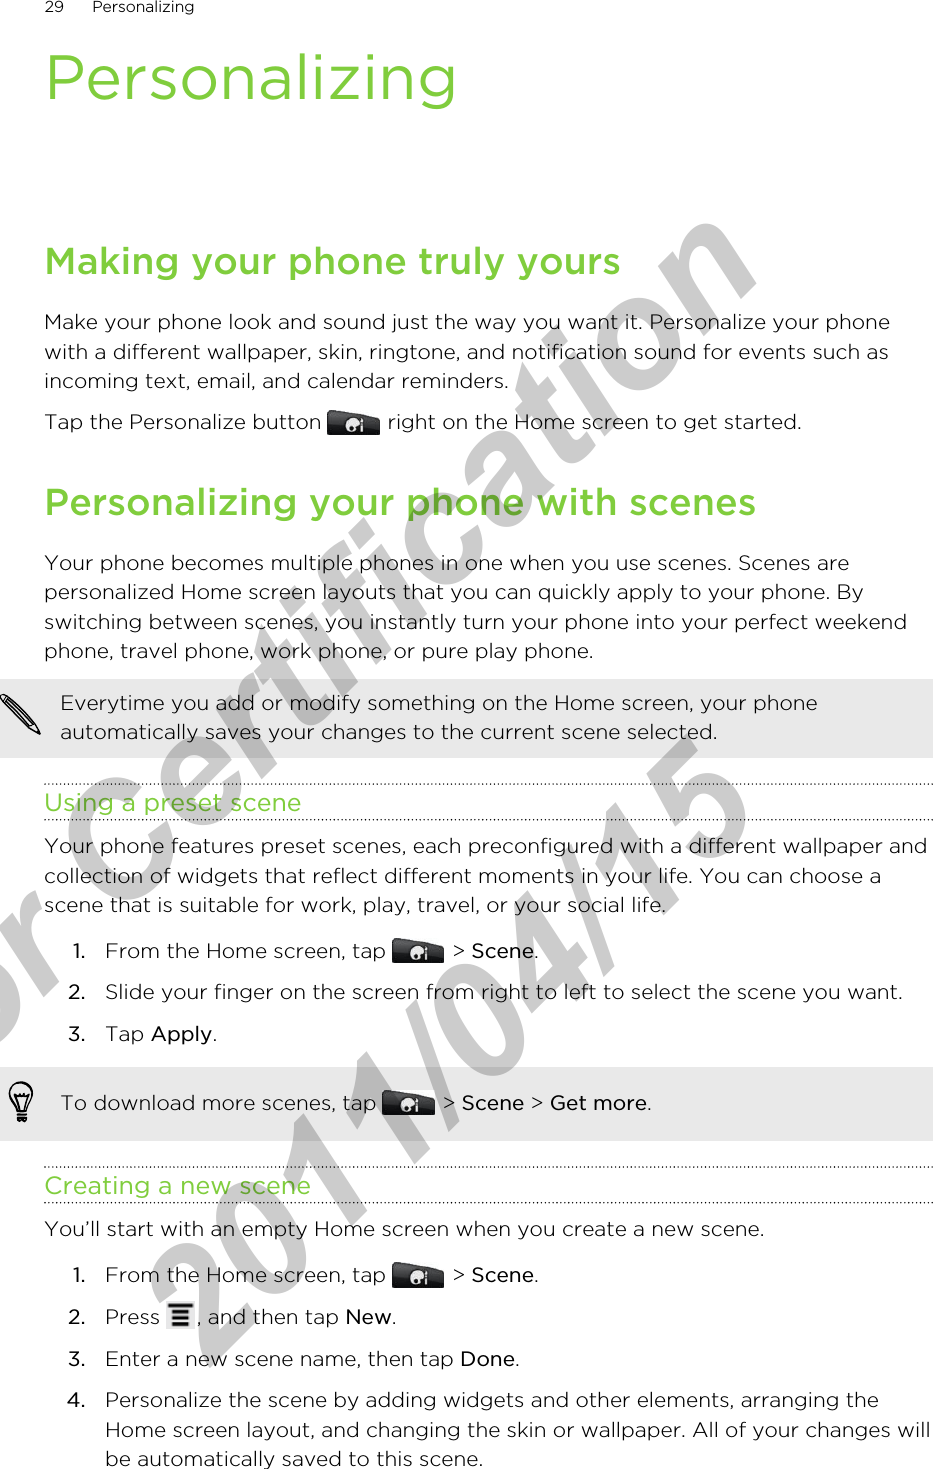 PersonalizingMaking your phone truly yoursMake your phone look and sound just the way you want it. Personalize your phonewith a different wallpaper, skin, ringtone, and notification sound for events such asincoming text, email, and calendar reminders.Tap the Personalize button   right on the Home screen to get started.Personalizing your phone with scenesYour phone becomes multiple phones in one when you use scenes. Scenes arepersonalized Home screen layouts that you can quickly apply to your phone. Byswitching between scenes, you instantly turn your phone into your perfect weekendphone, travel phone, work phone, or pure play phone.Everytime you add or modify something on the Home screen, your phoneautomatically saves your changes to the current scene selected.Using a preset sceneYour phone features preset scenes, each preconfigured with a different wallpaper andcollection of widgets that reflect different moments in your life. You can choose ascene that is suitable for work, play, travel, or your social life.1. From the Home screen, tap   &gt; Scene.2. Slide your finger on the screen from right to left to select the scene you want.3. Tap Apply.To download more scenes, tap   &gt; Scene &gt; Get more.Creating a new sceneYou’ll start with an empty Home screen when you create a new scene.1. From the Home screen, tap   &gt; Scene.2. Press  , and then tap New.3. Enter a new scene name, then tap Done.4. Personalize the scene by adding widgets and other elements, arranging theHome screen layout, and changing the skin or wallpaper. All of your changes willbe automatically saved to this scene.29 Personalizingfor Certification  2011/04/15